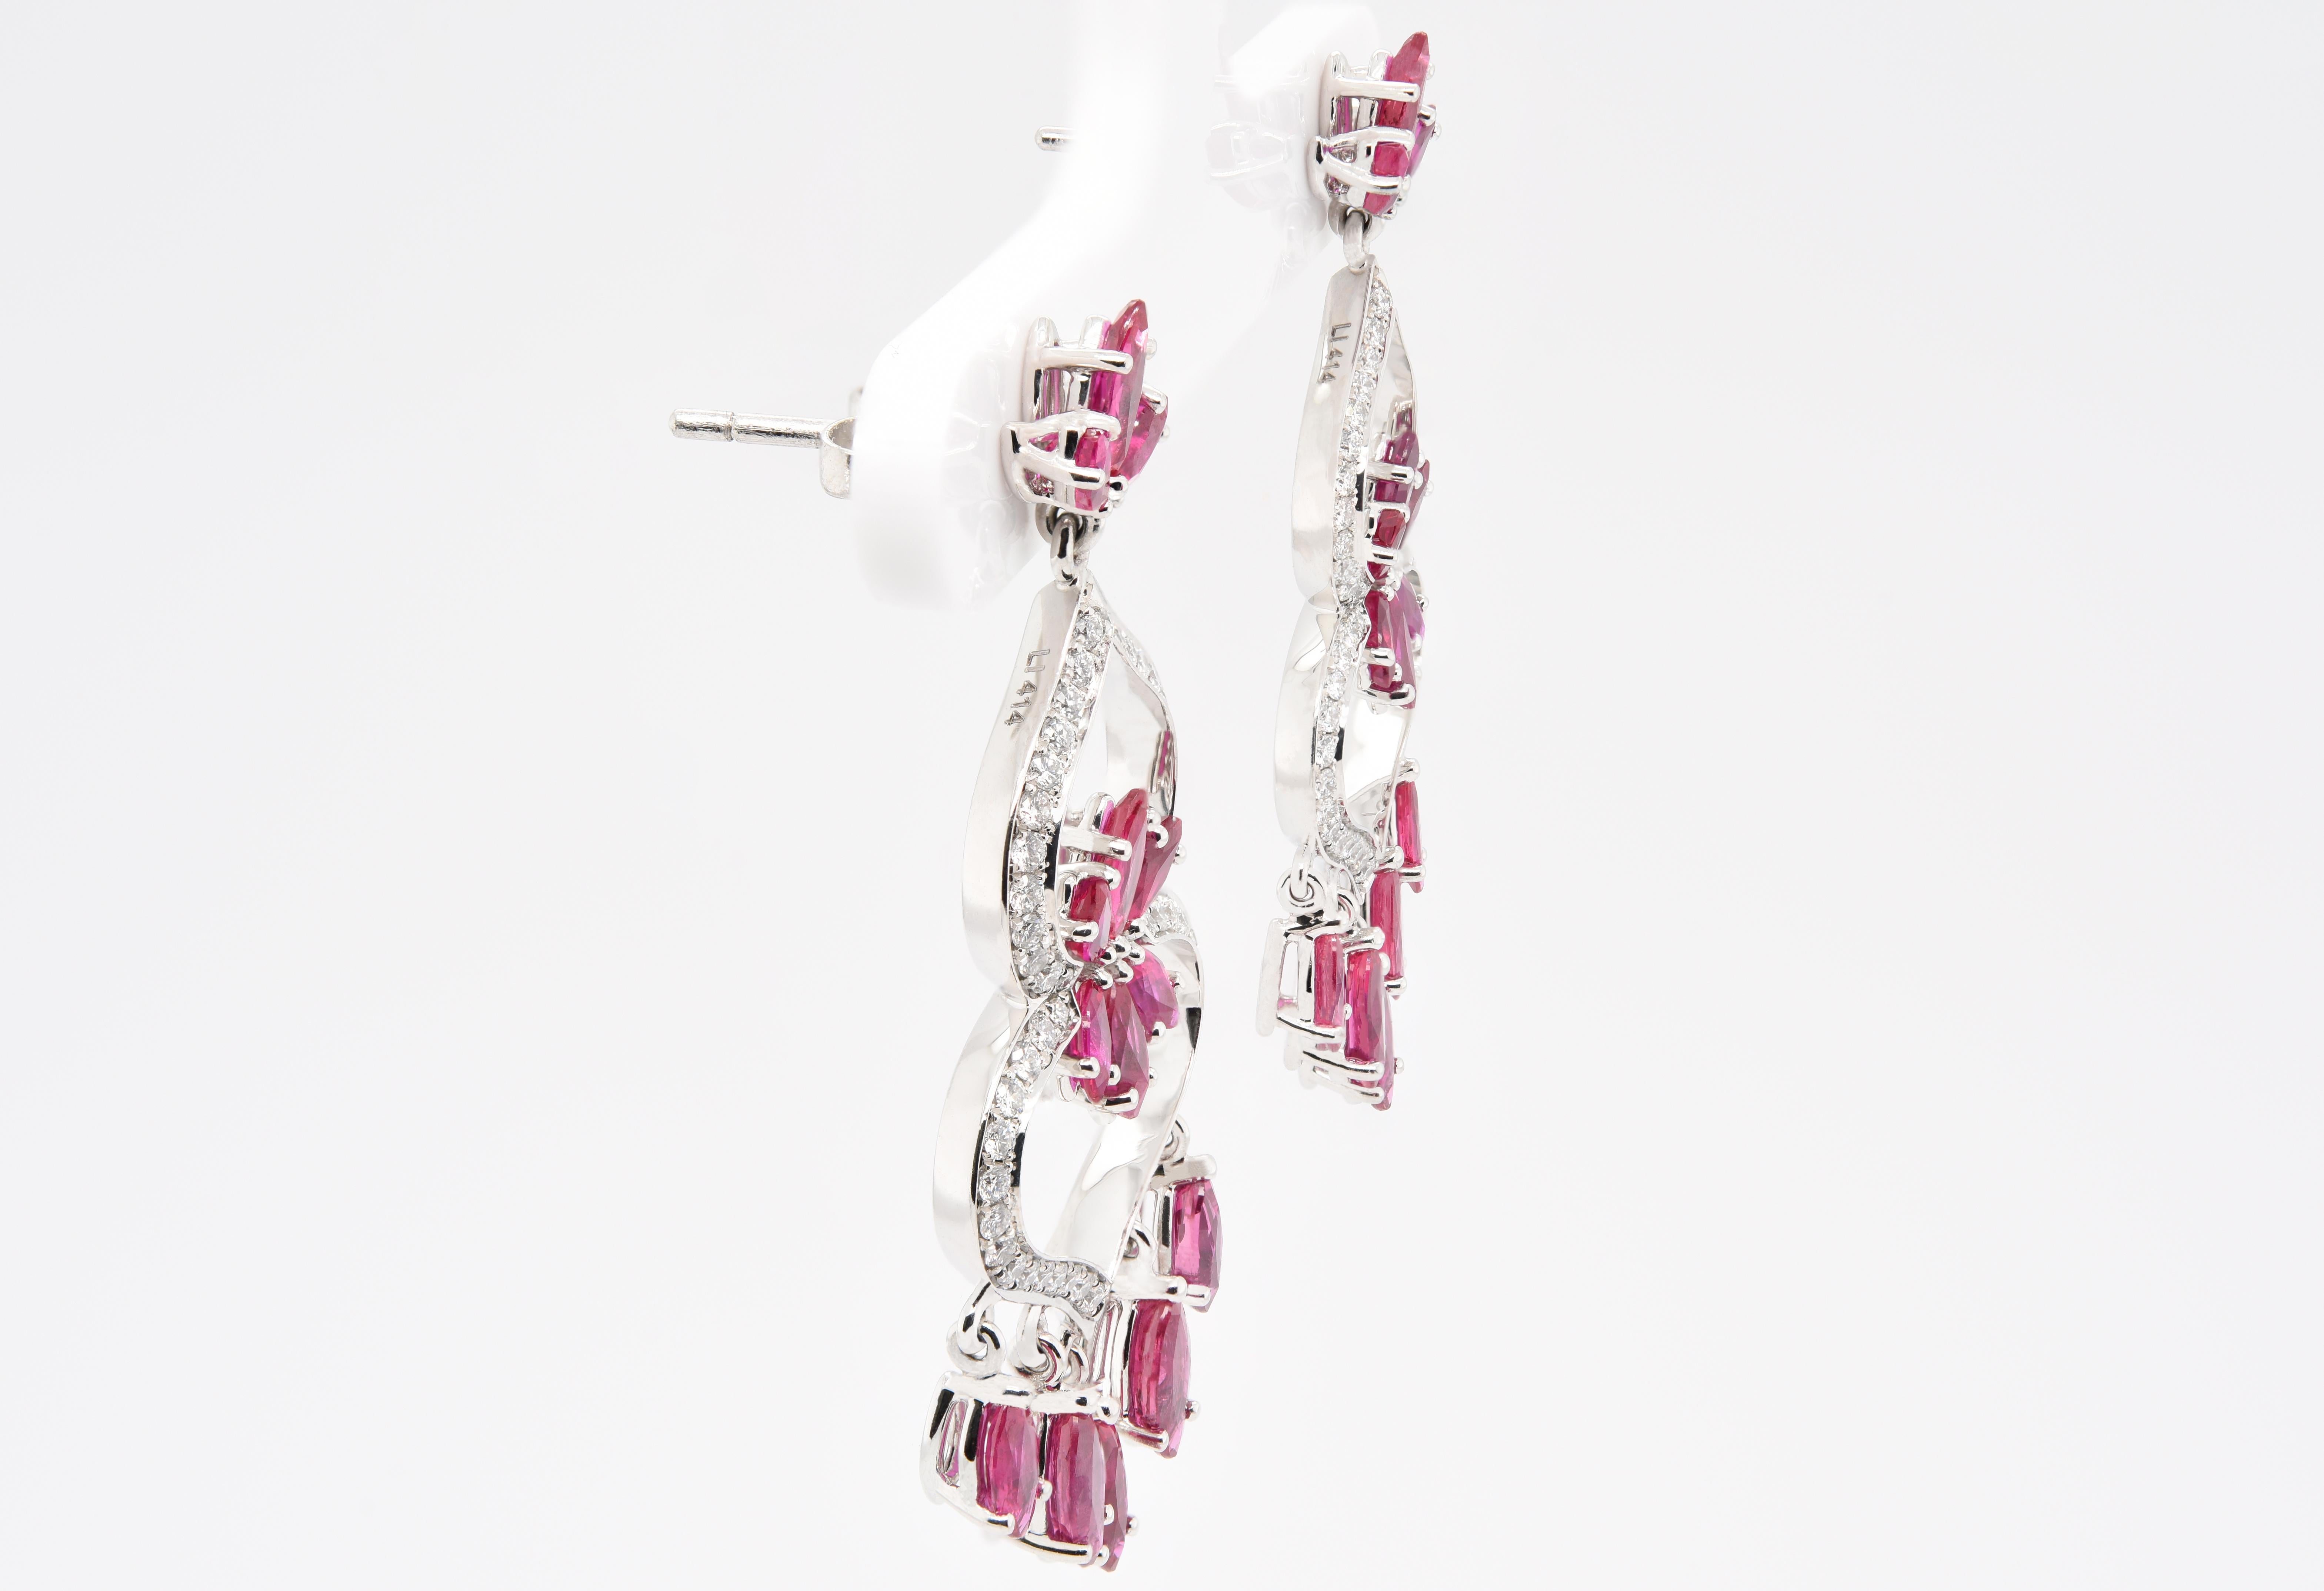 JAG New York created for you these ruby and diamond earrings that is comprised of 5.75 carats total gemstone weight of rubies and diamonds set in platinum.  

Unapologetic self-expression through jewelry. JAG New York's world class designs does just